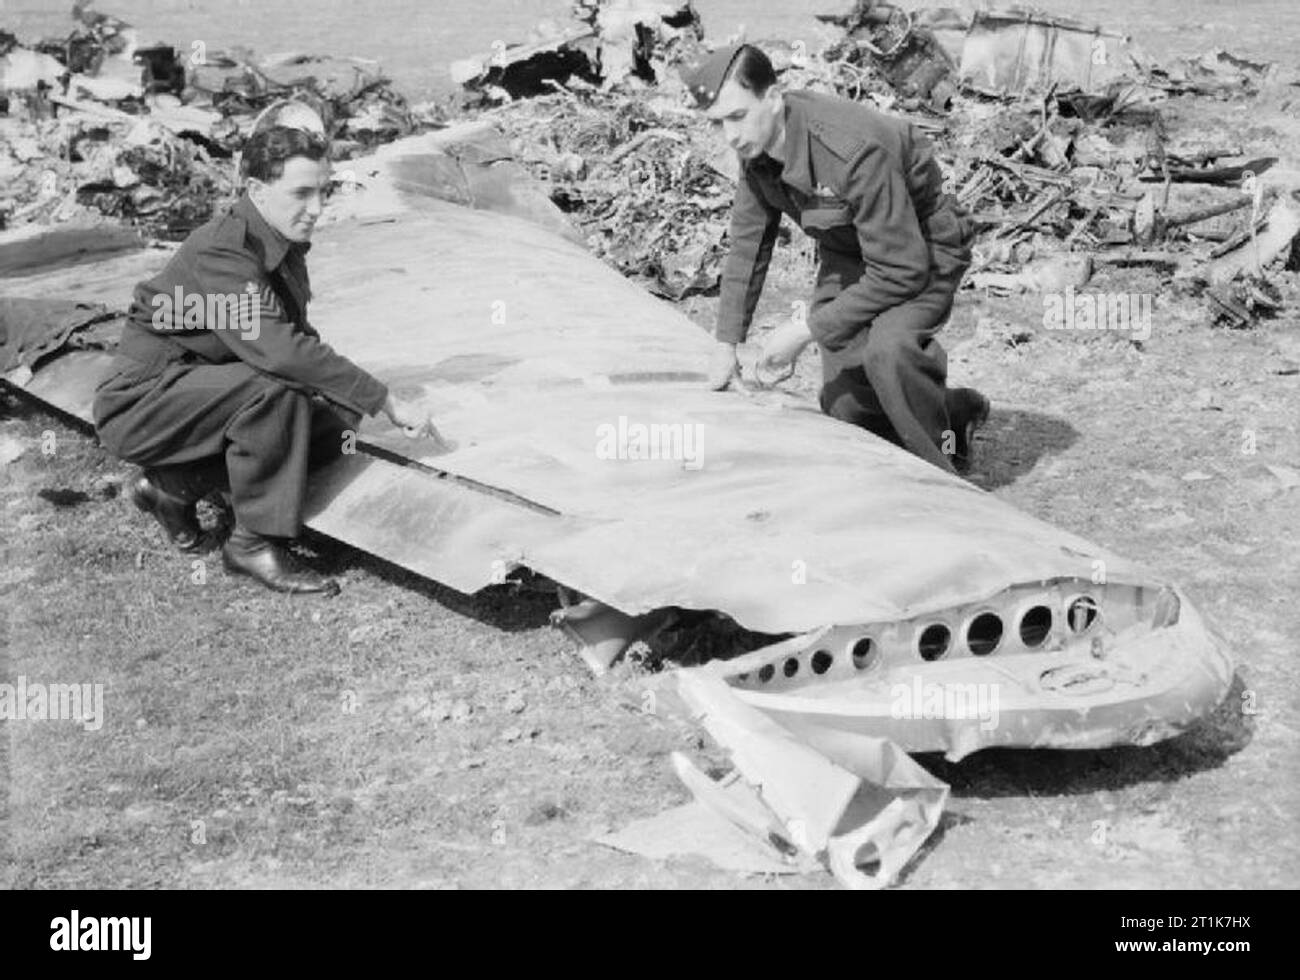 Royal Air Force 1939-1945- Fighter Command Pilot Officer J Allen (right) and Flight Sergeant W Patterson, a No 96 Squadron Mosquito crew based at West Malling, survey the wreckage of the Ju 88 which they shot down near Cranbrook in Kent on the night of 18-19 April 1944. The Junkers was one of eight enemy bombers destroyed by RAF night-fighters that night, during the last Operation Steinbock raid on London. The Ju 88A-4 belonged to 6 staffel KG 6 (Kampfgeschwader 6). The machine was code 3E+BP Werknummer 2537. Unteroffizier Helmut Barbauer and Unteroffizier Friedrich Schork were taken prisoner. Stock Photo